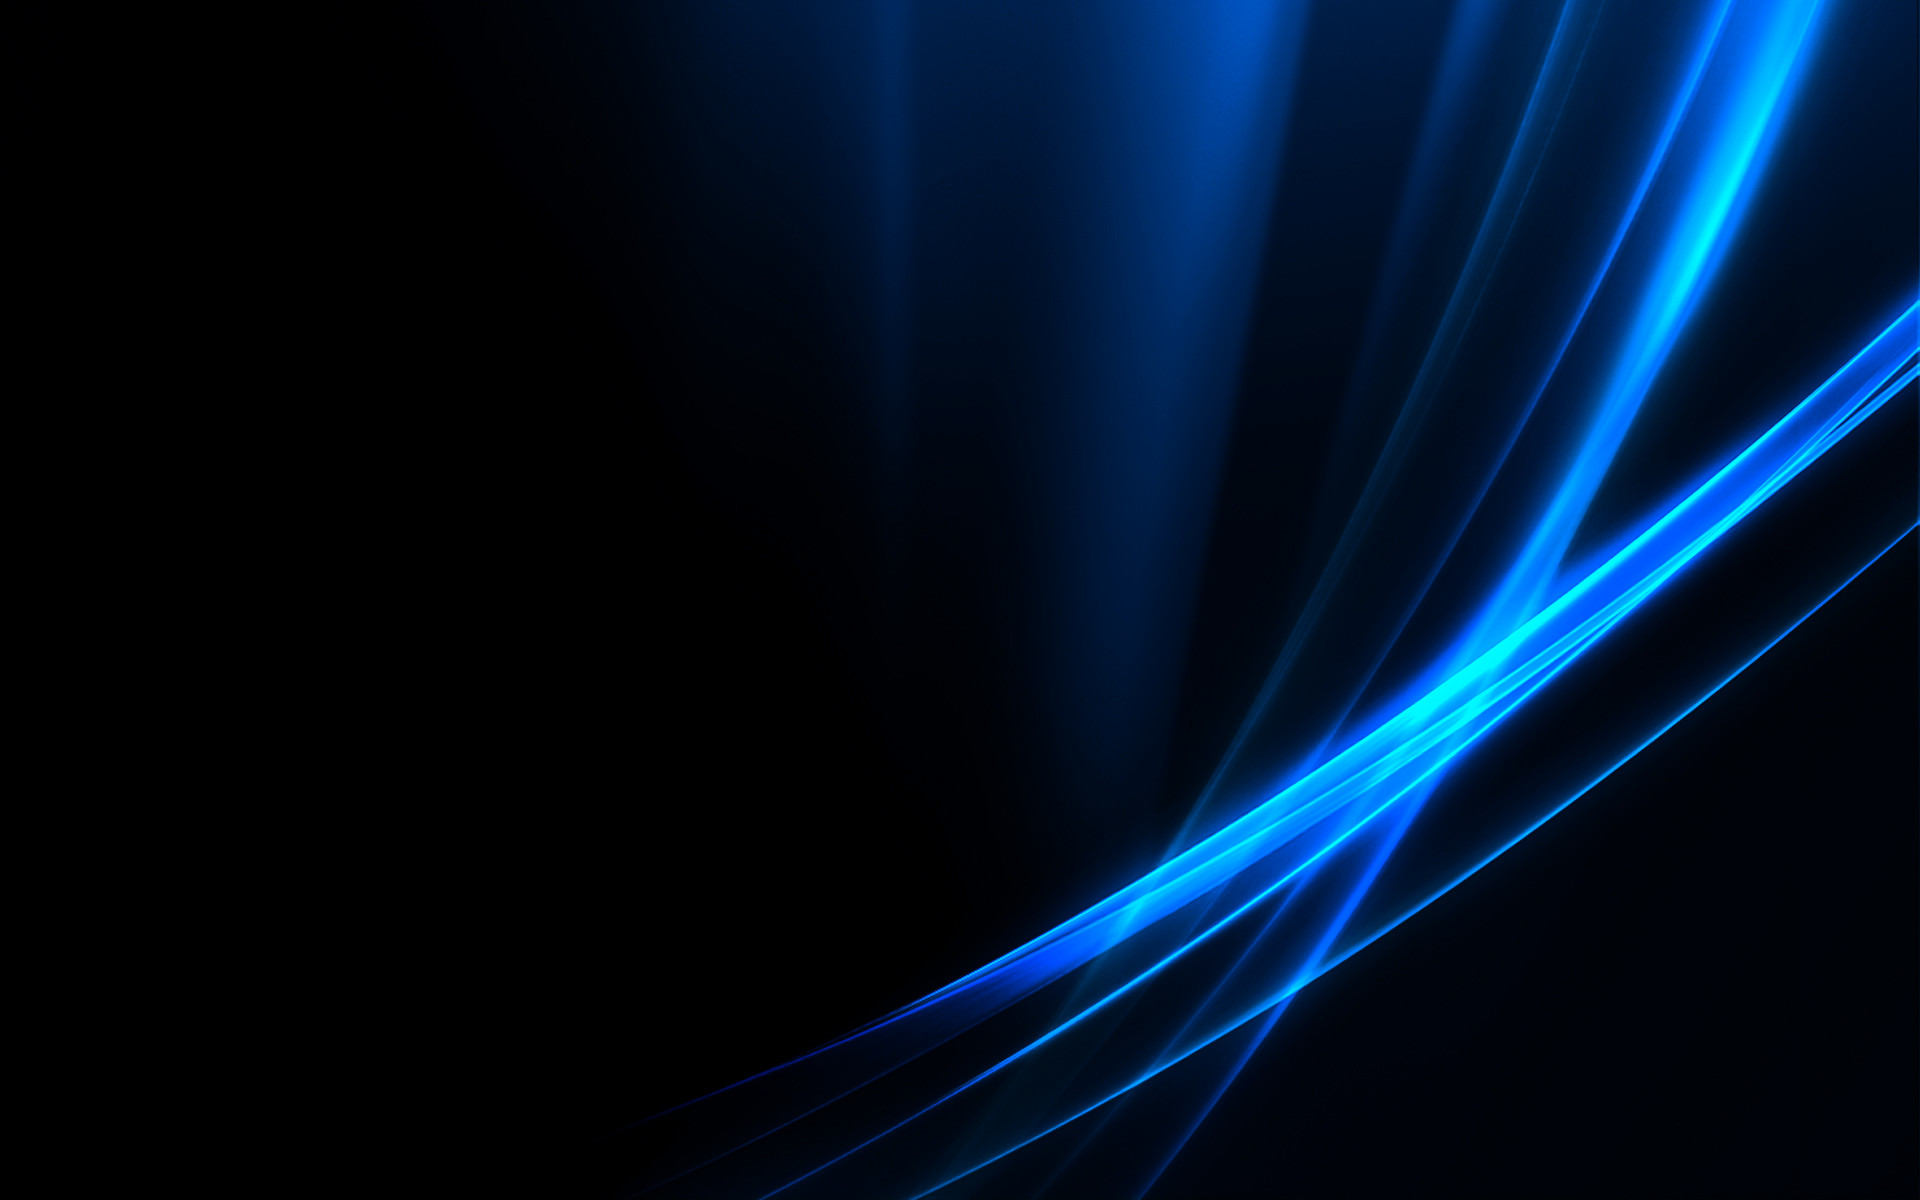 1920 x 1200 Wallpapers, Widescreen Wallpapers, 12277 abstract blue